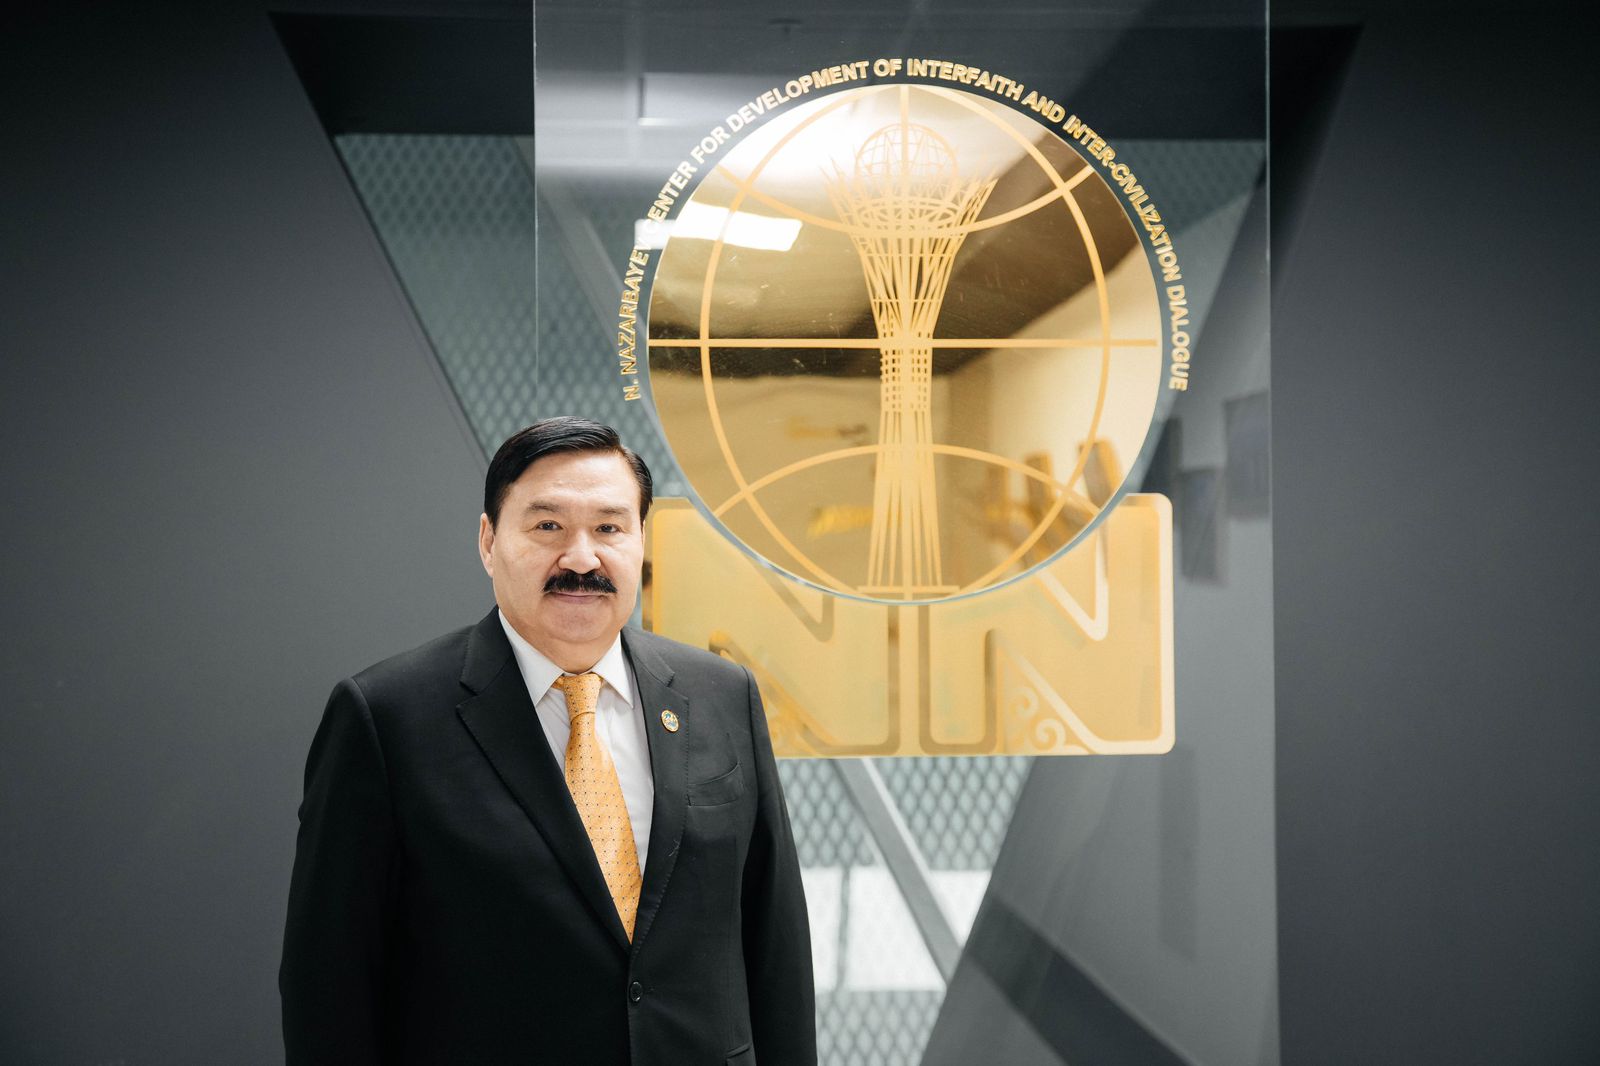 Article by Bulat Sarsenbayev Chairman of the Board of the Nazarbayev Center for the Development of Interfaith and Inter-civilizational Dialogue